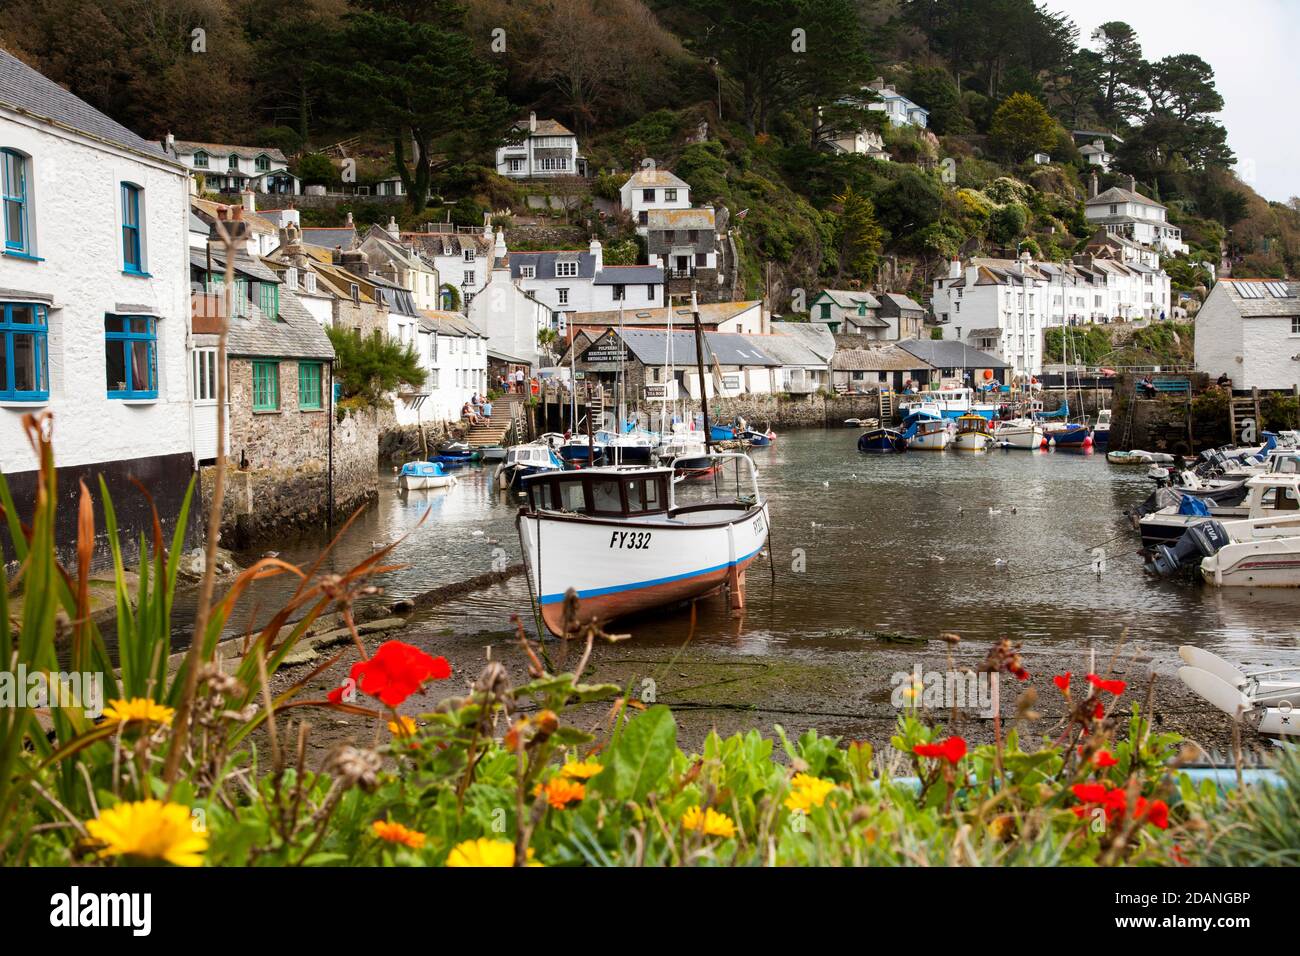 The harbour in the pictruresque fishing village of Polperro, Cornwall, England, U.K. Stock Photo